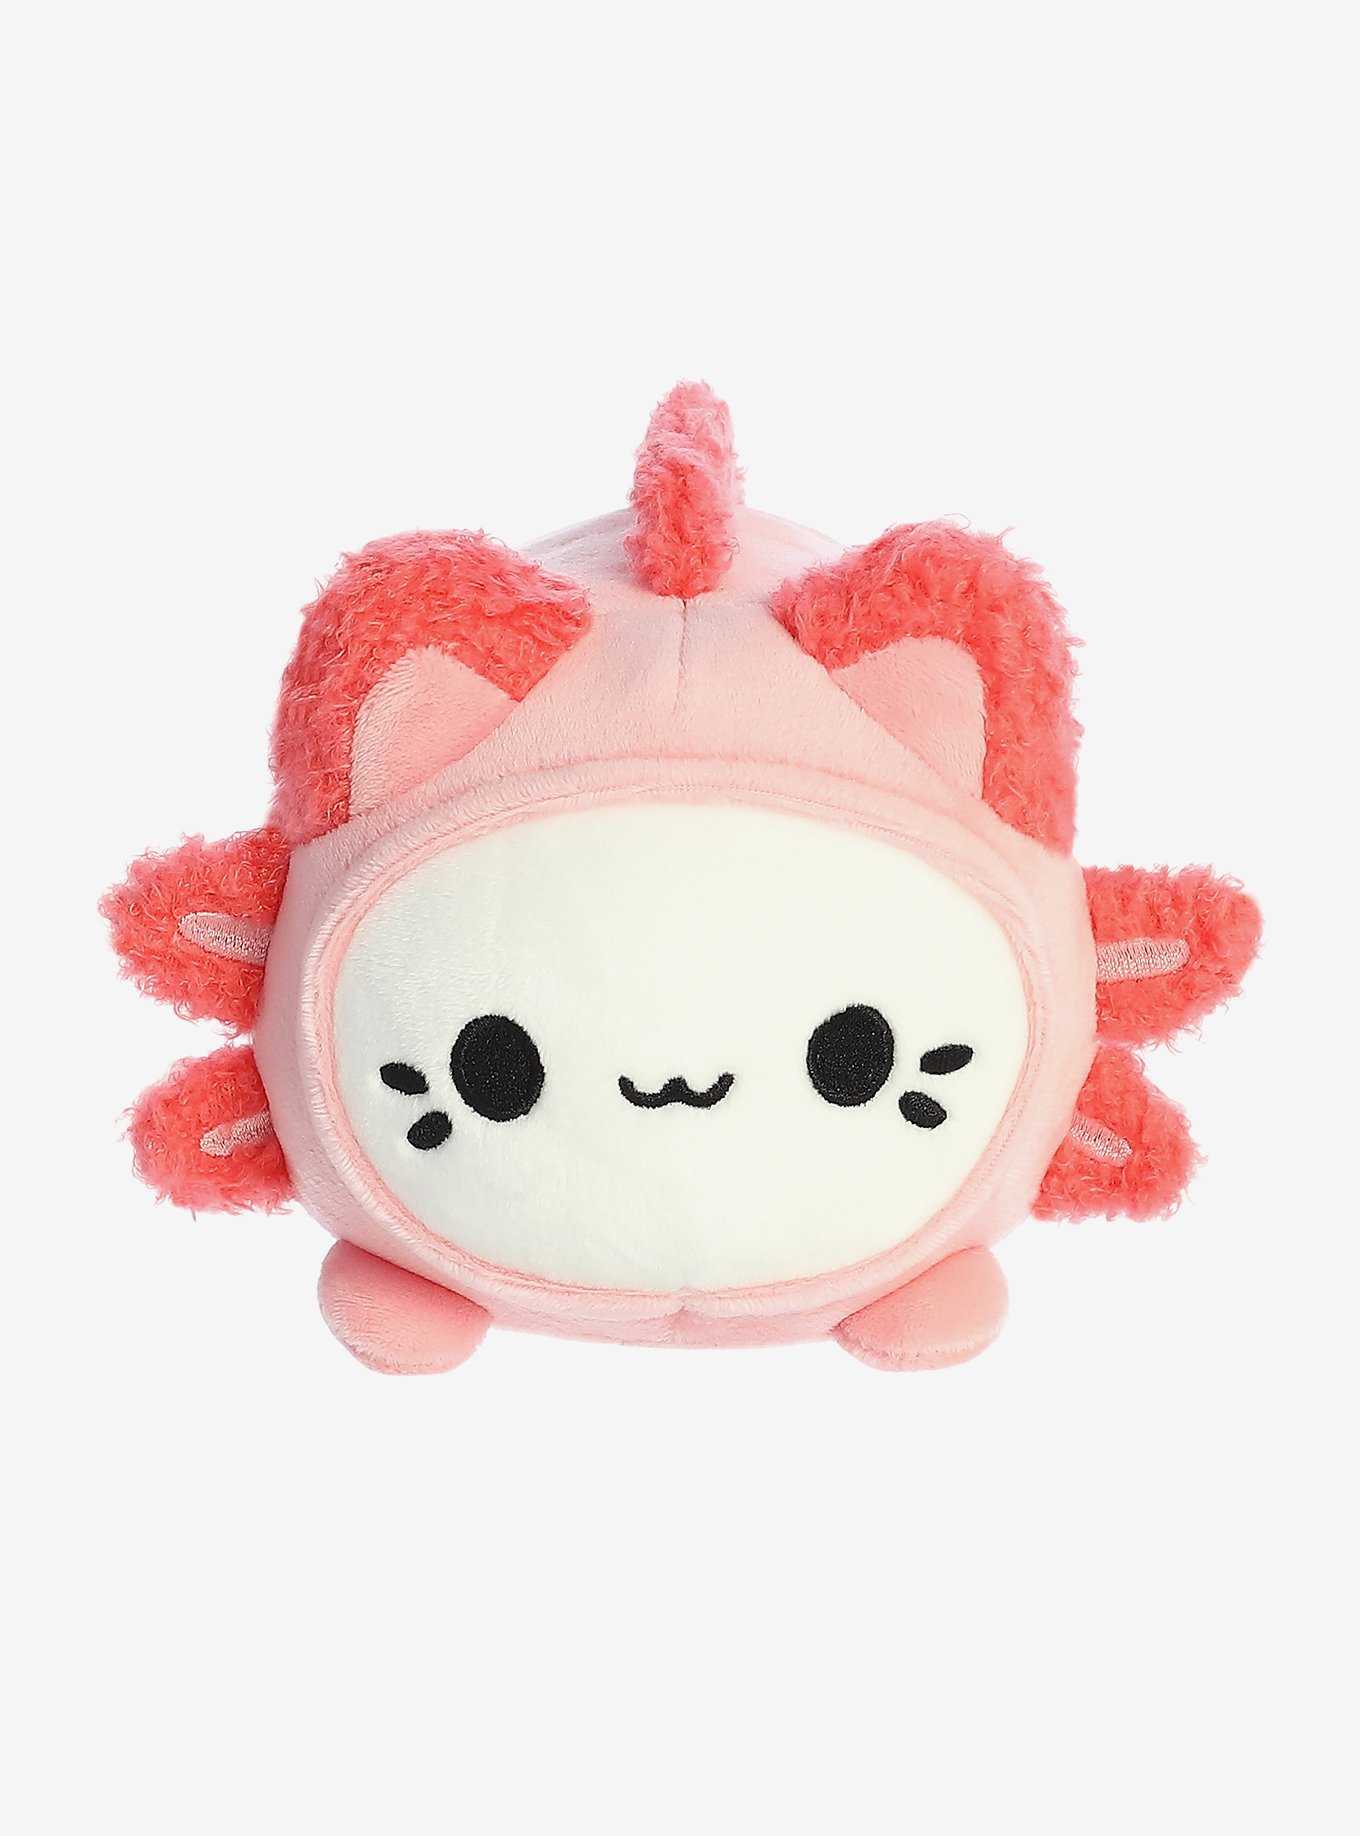 Squishmallows Cherry Blossom Frog Plush Hot Topic Exclusive